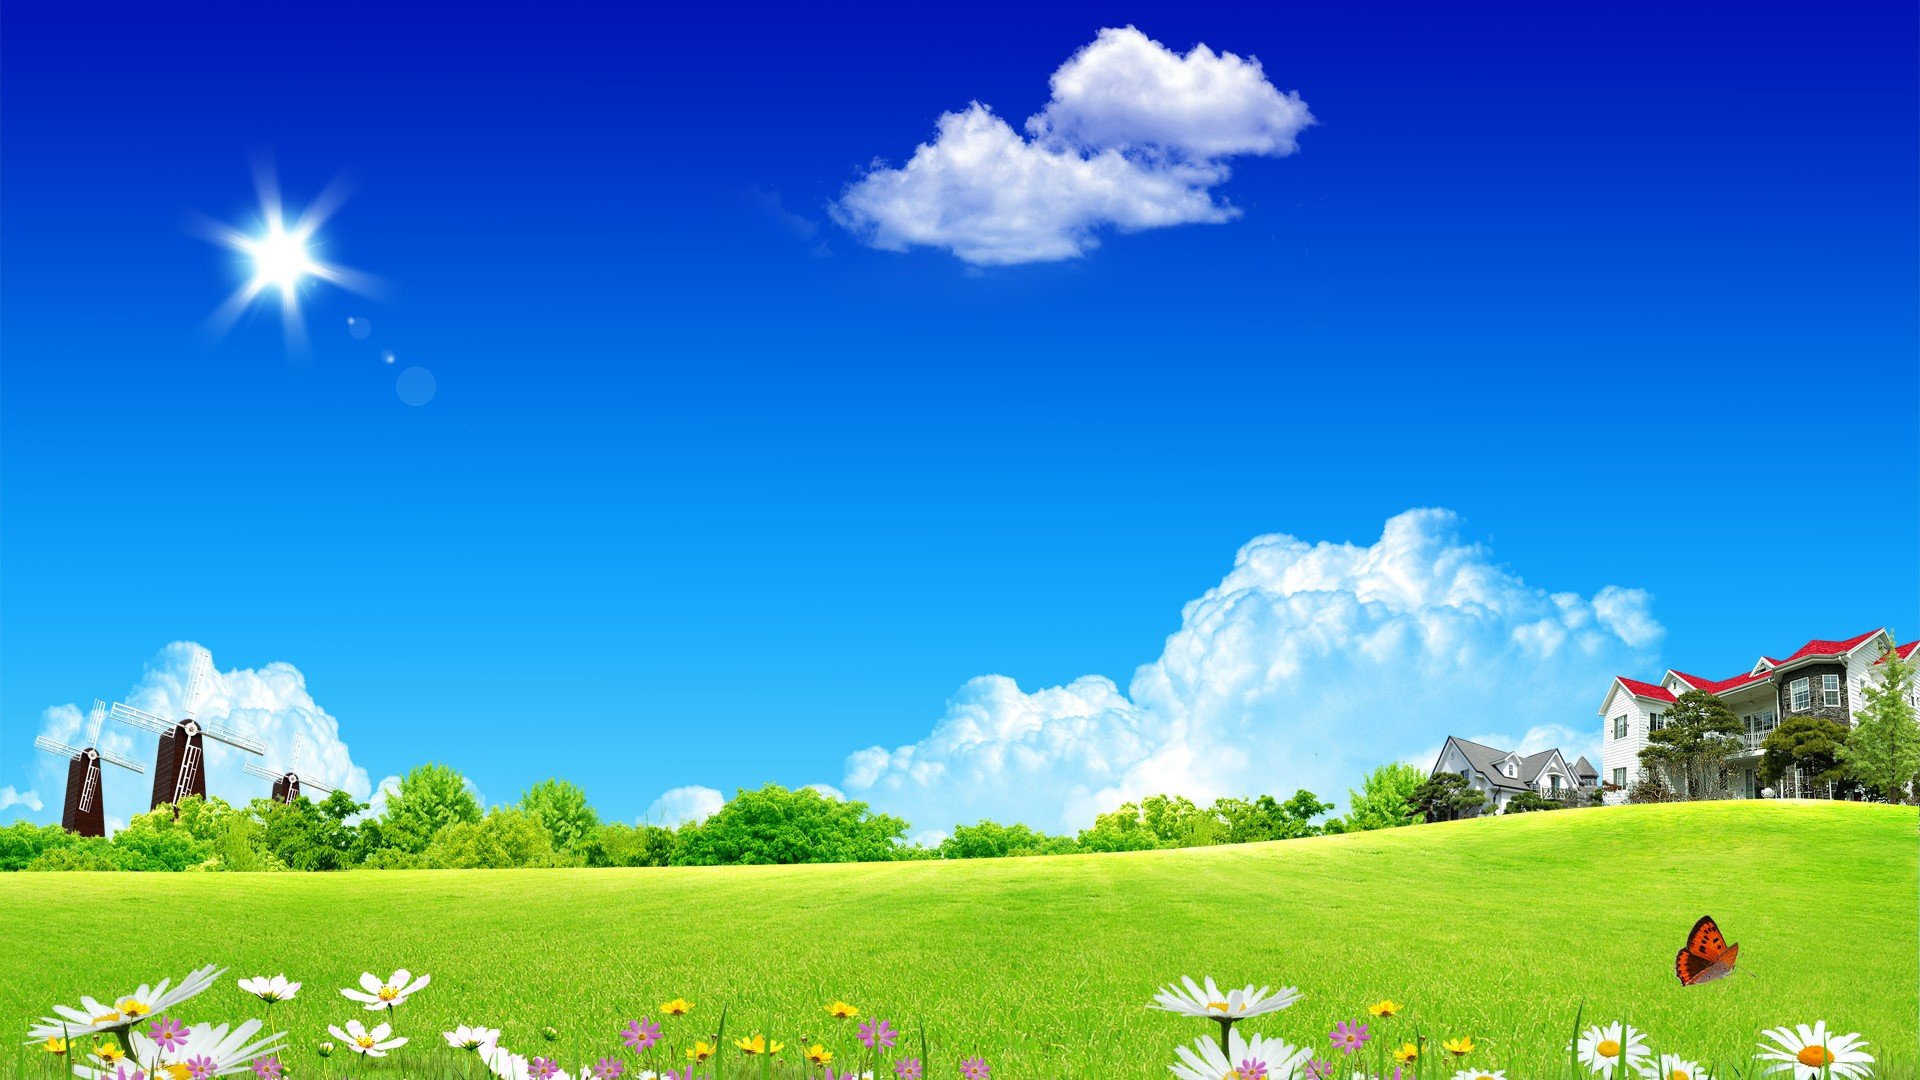 Sunny spring Windows 81 Theme and HD Background